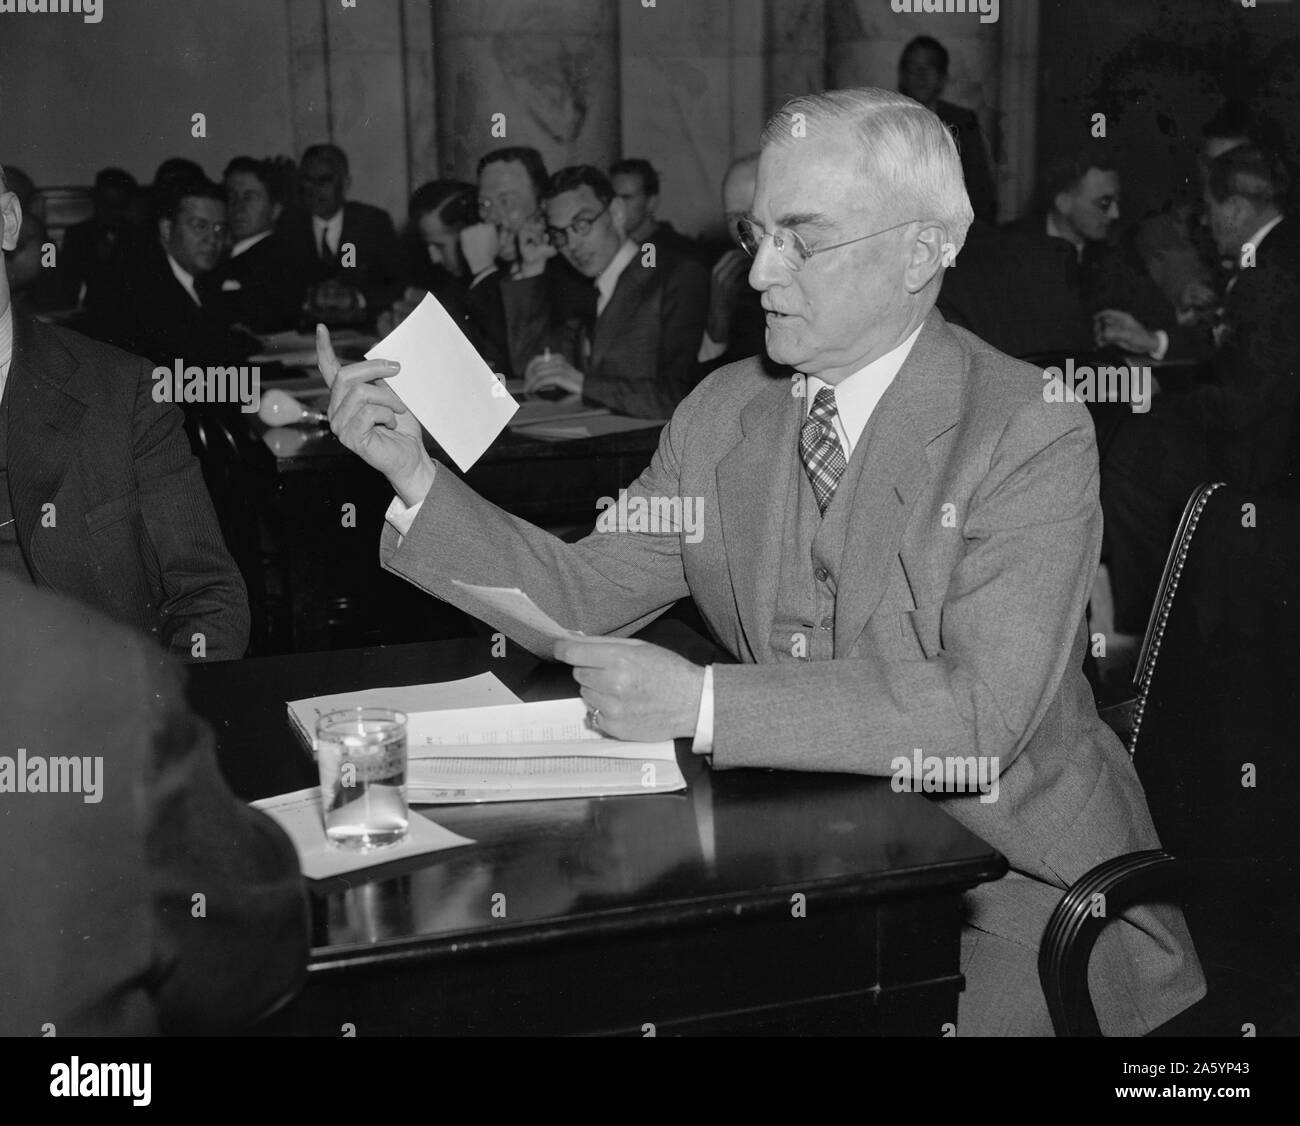 Washington, D.C., Oct. 20. Secretary Of Interior Harold Ickes (left) congratulates Nathan Straus, New York Housing expert, on his appointment as Head of the new U.S. Housing Administration. 1938 . Stock Photo